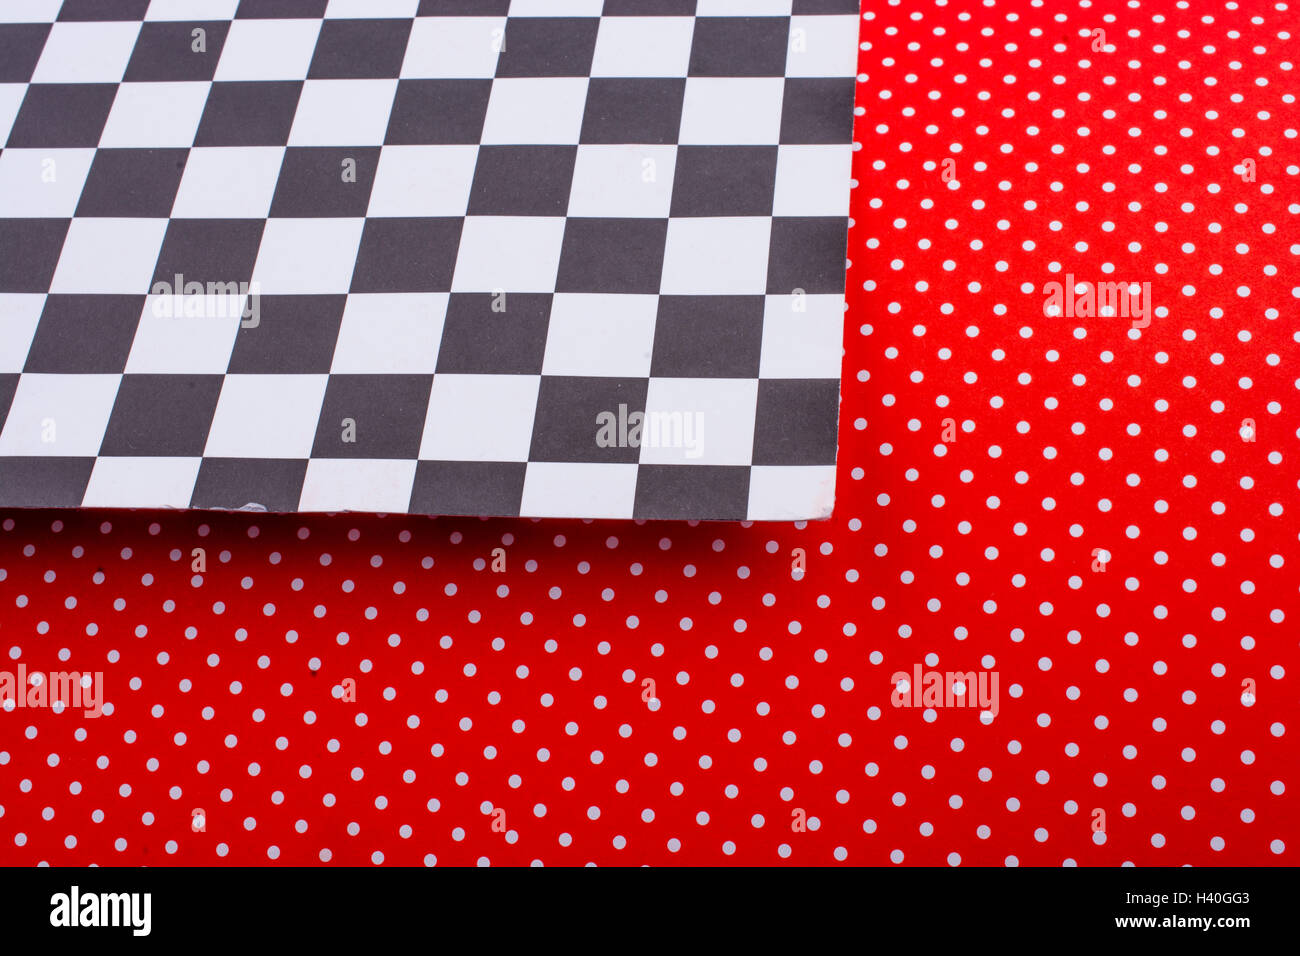 Red dotted paper and black and white checked board pattern Stock Photo